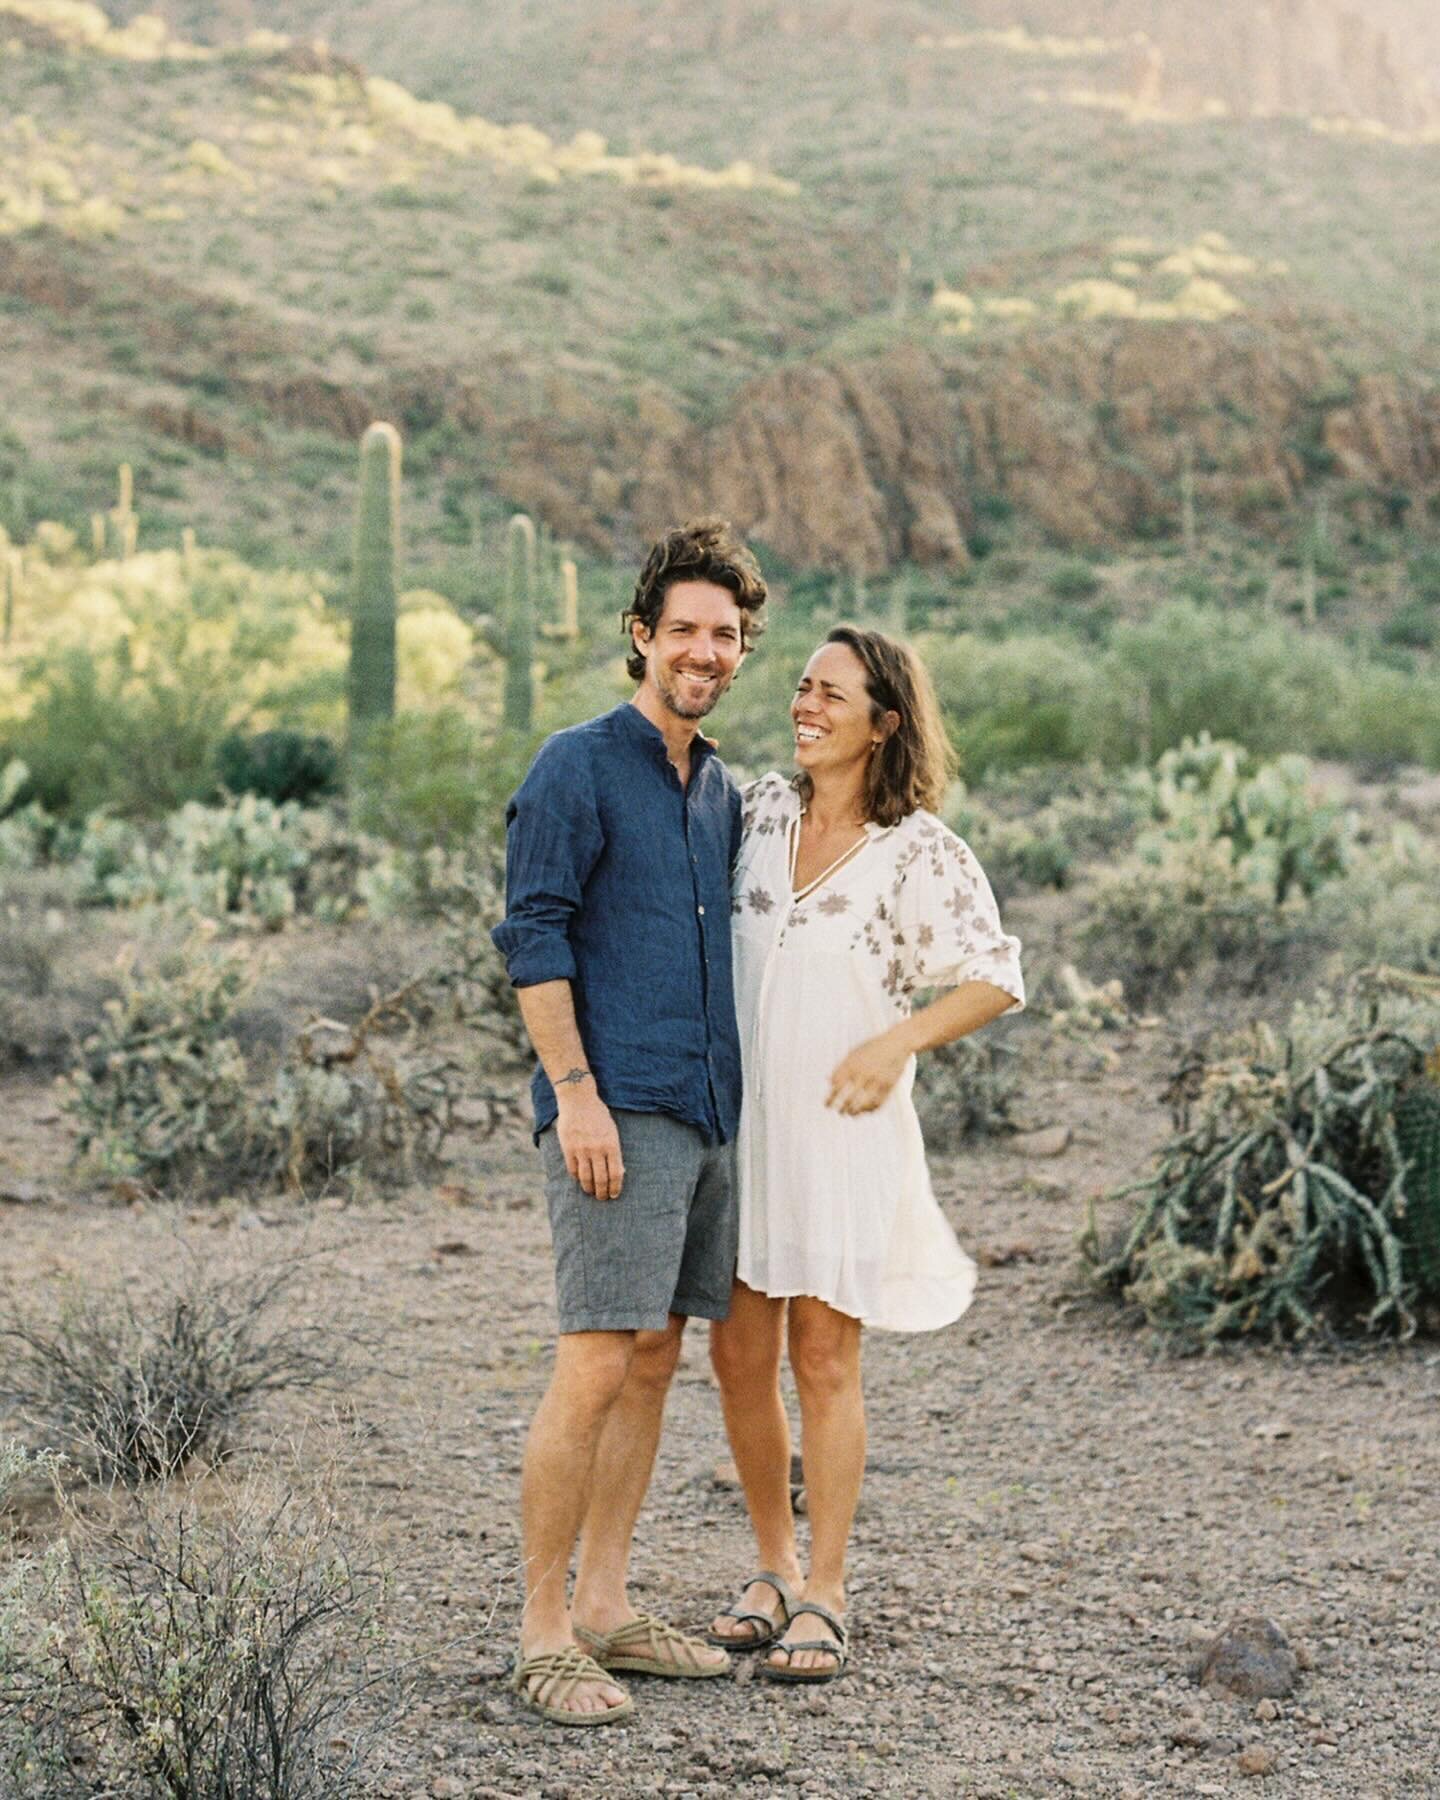 10 frames on 35mm with Ashley &amp; Neil. These two contacted me just before they left Tucson for cooler temps in Oregon. We worked together to preserve some memories of their home and the place where they were married. It&rsquo;s an honor to capture